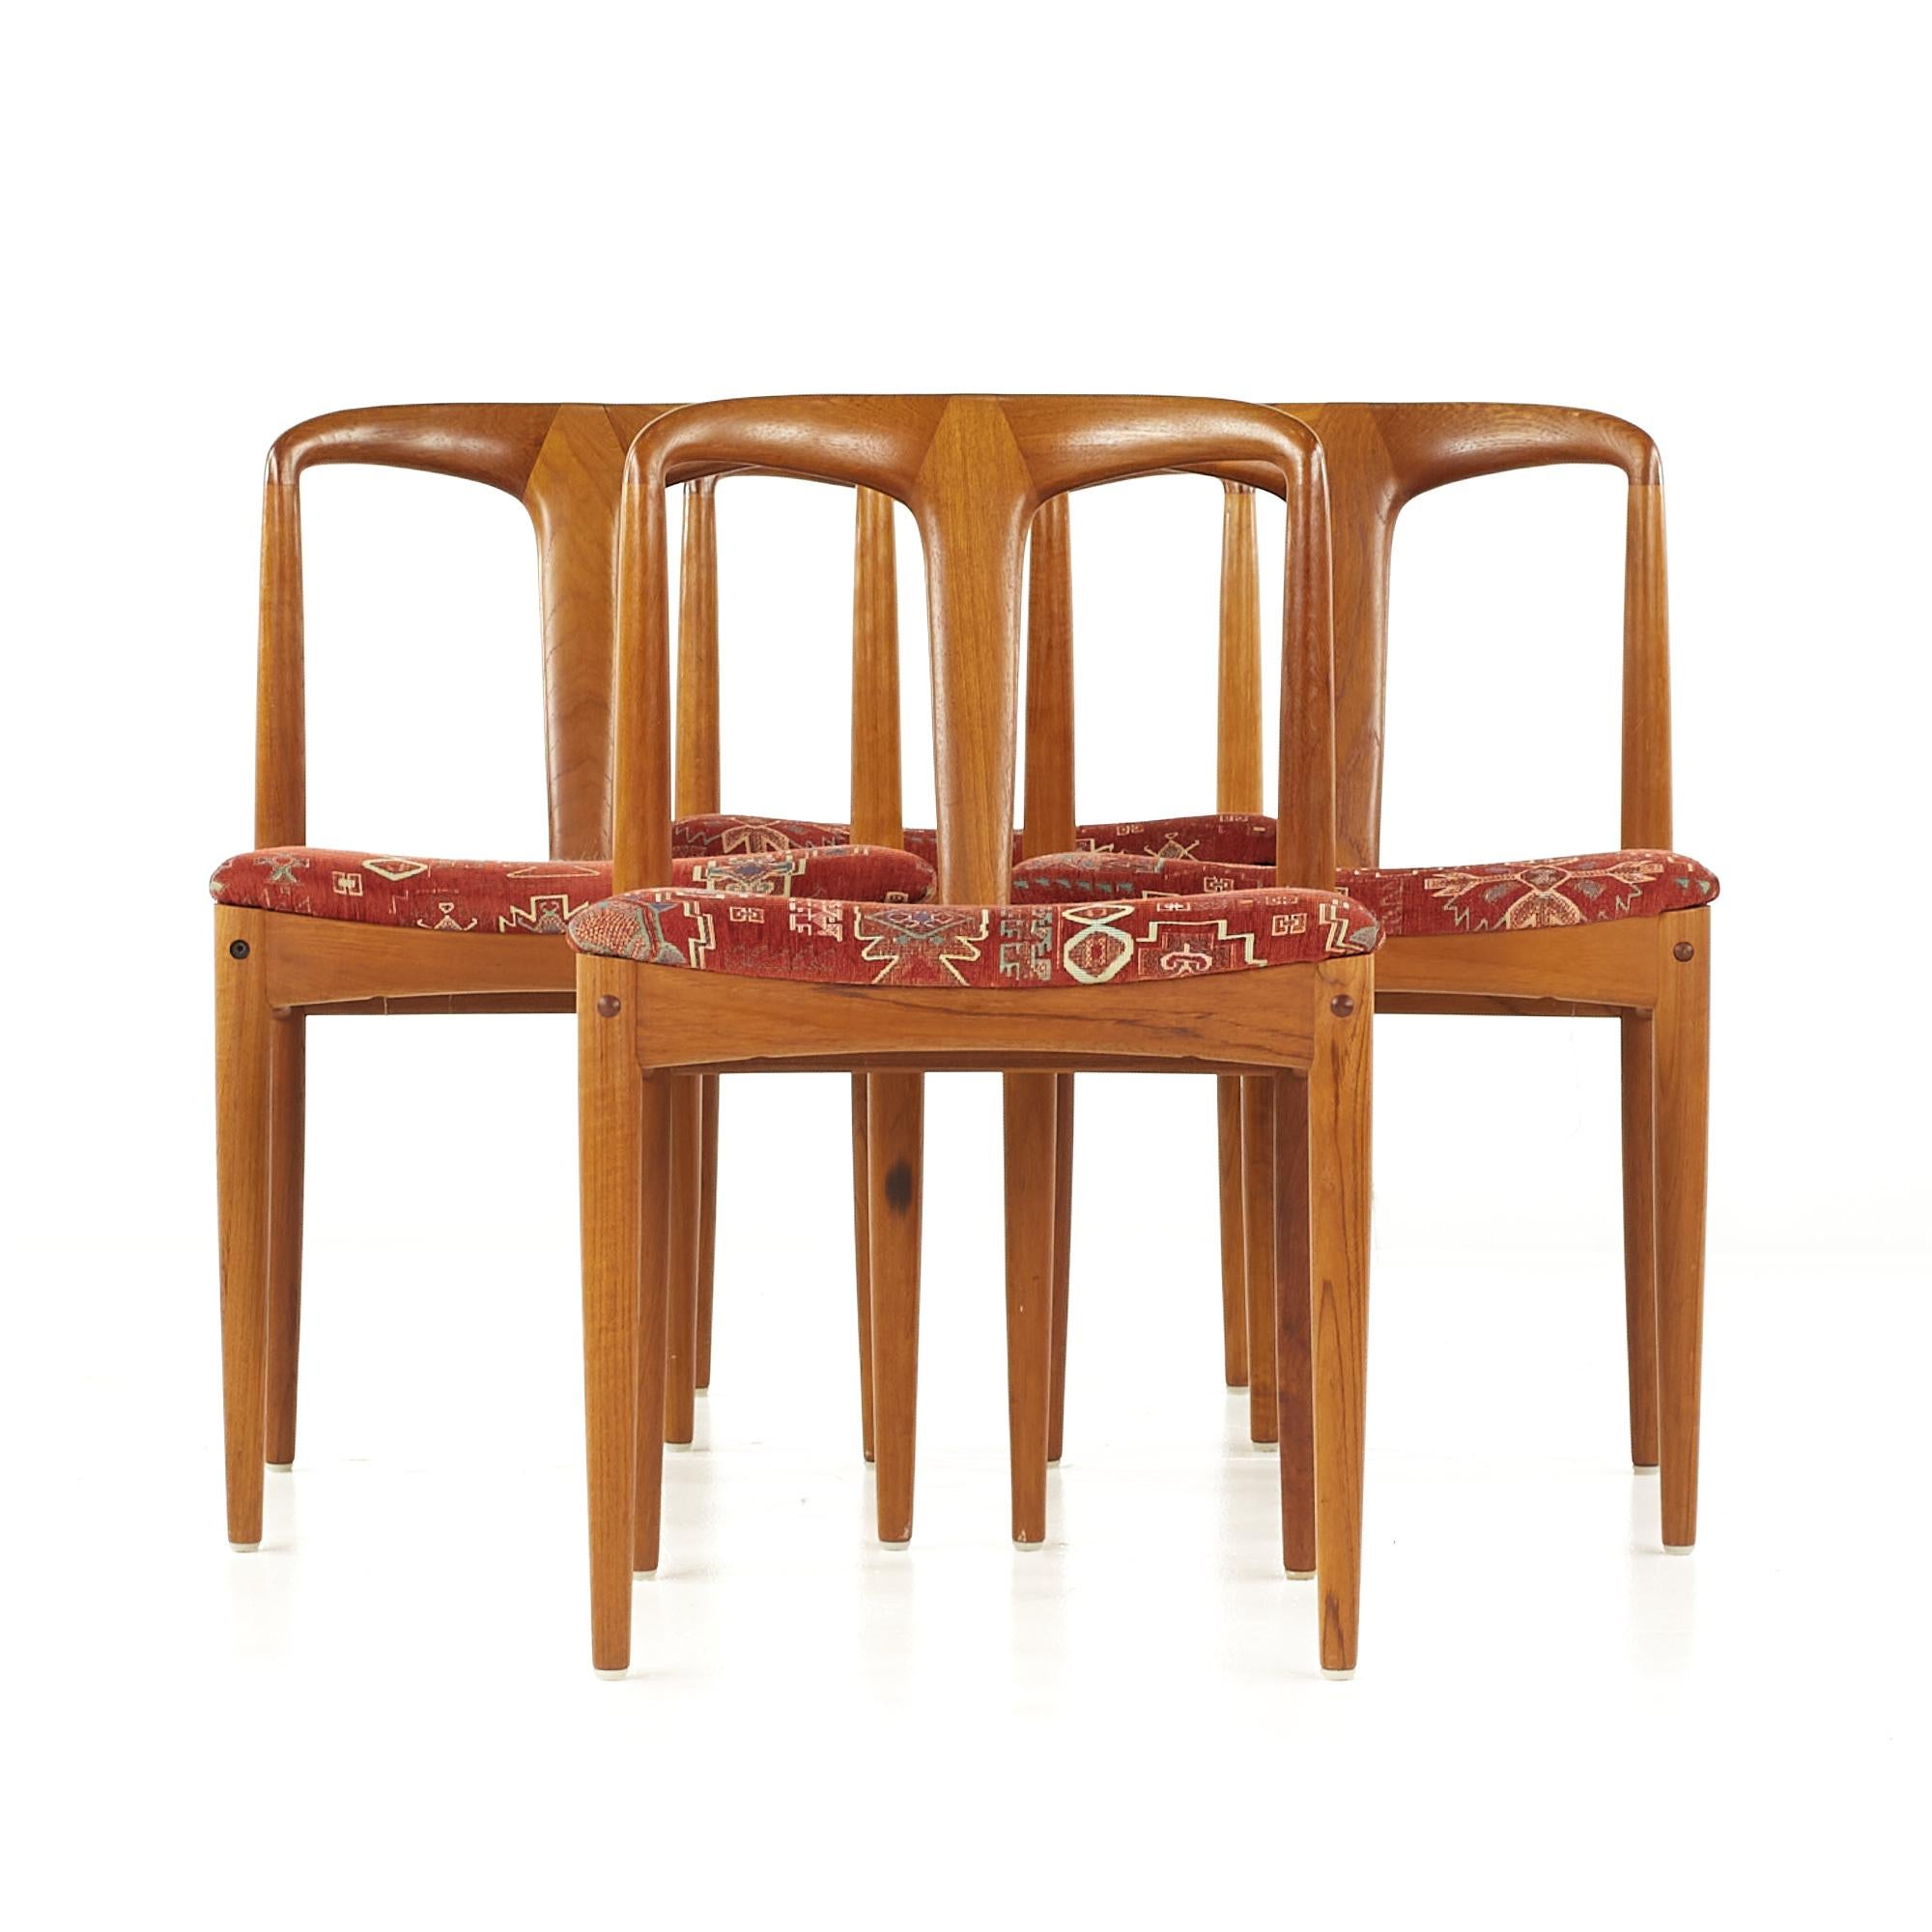 Johannes Andersen Mid Century Teak Juliane dining chairs - Set of 4

Each chair measures: 18 wide x 18 deep x 31 inches high, with a seat height/chair clearance of 18 inches

All pieces of furniture can be had in what we call restored vintage